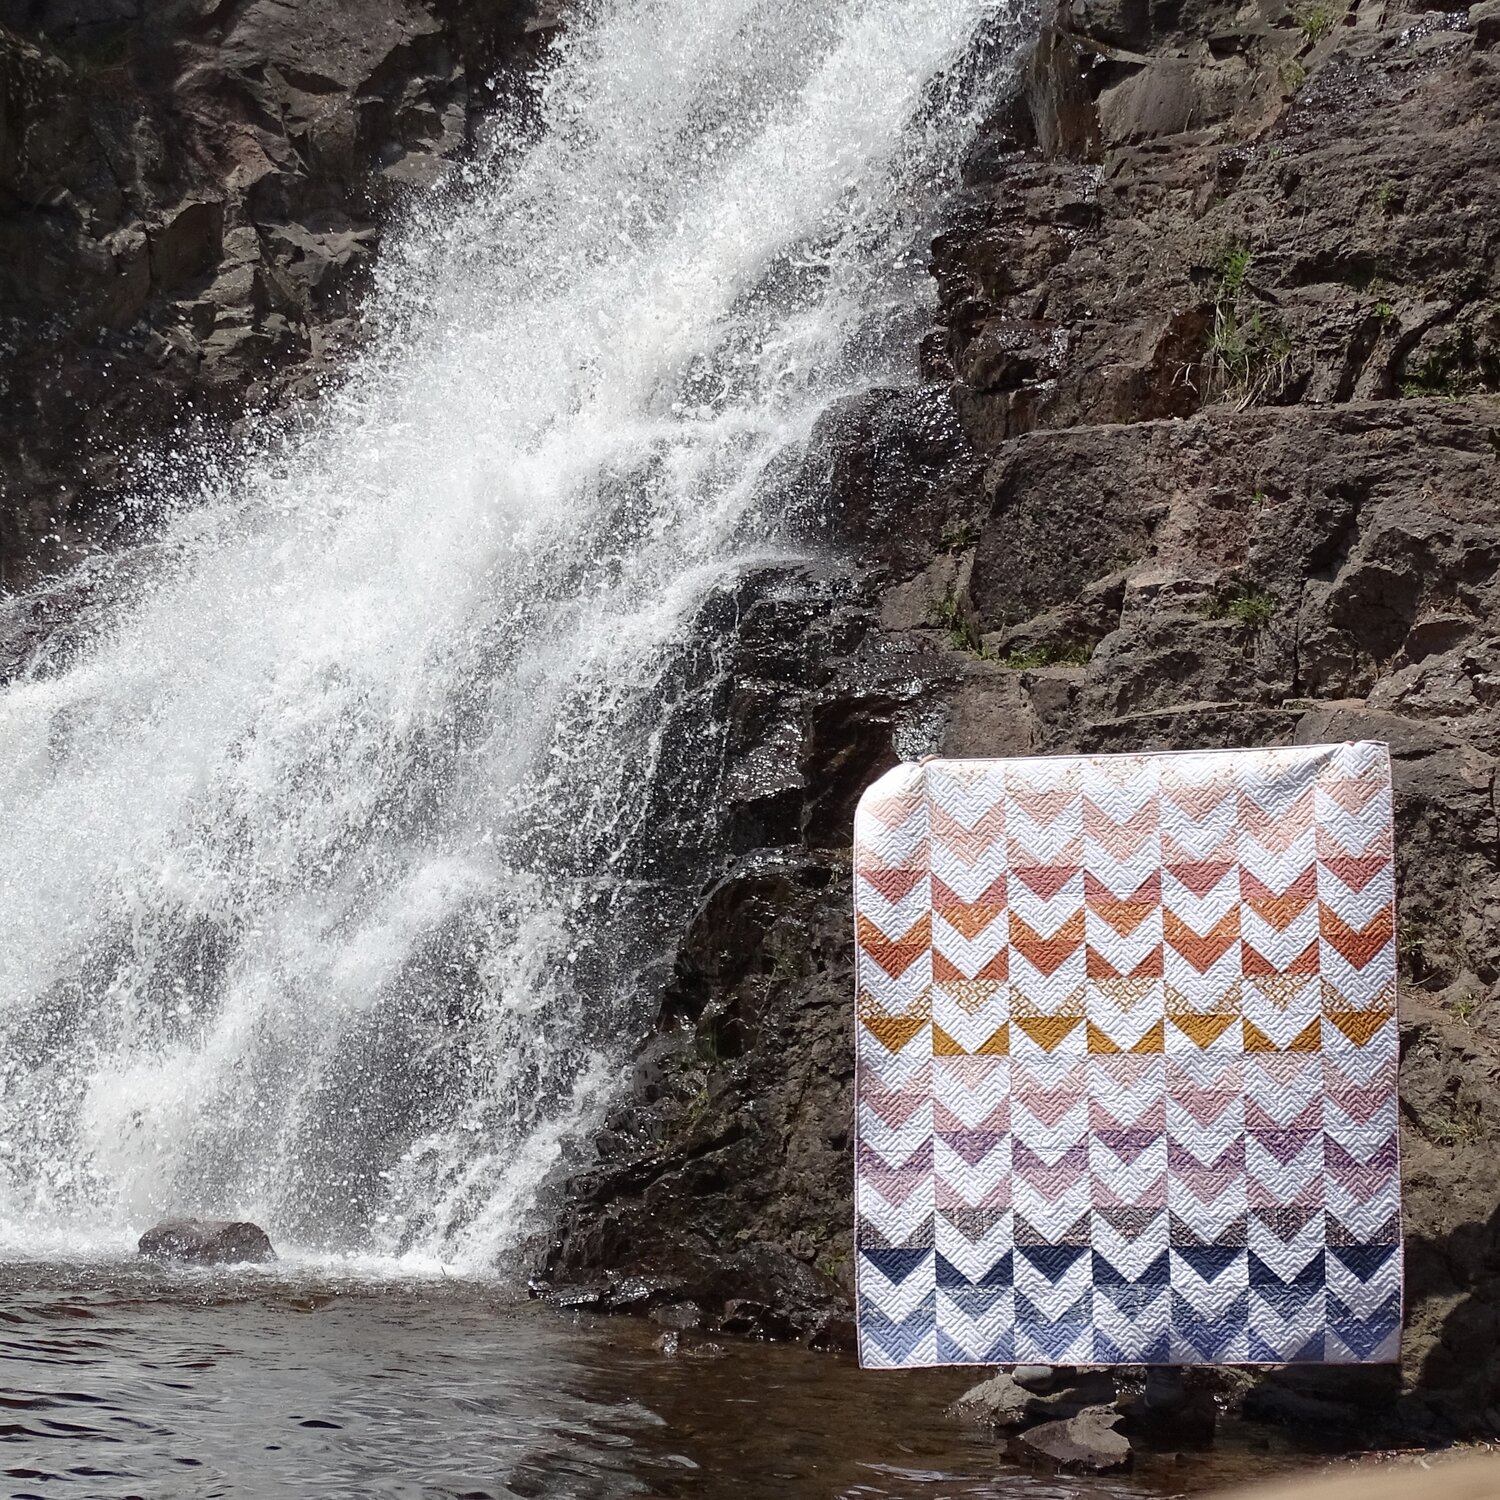 Mary made her show-stopping quilt using Art Gallery Fabric’s new Lilliput collection by Sharon Holland. She has kits available in her shop here if you want your own just like this! Also - what a gorgeous location for a proper Quilts-in-the-Wild photo! Mary has a fabric shop and a feed full of gorgeous quilts on IG @rosiegirlquilting.